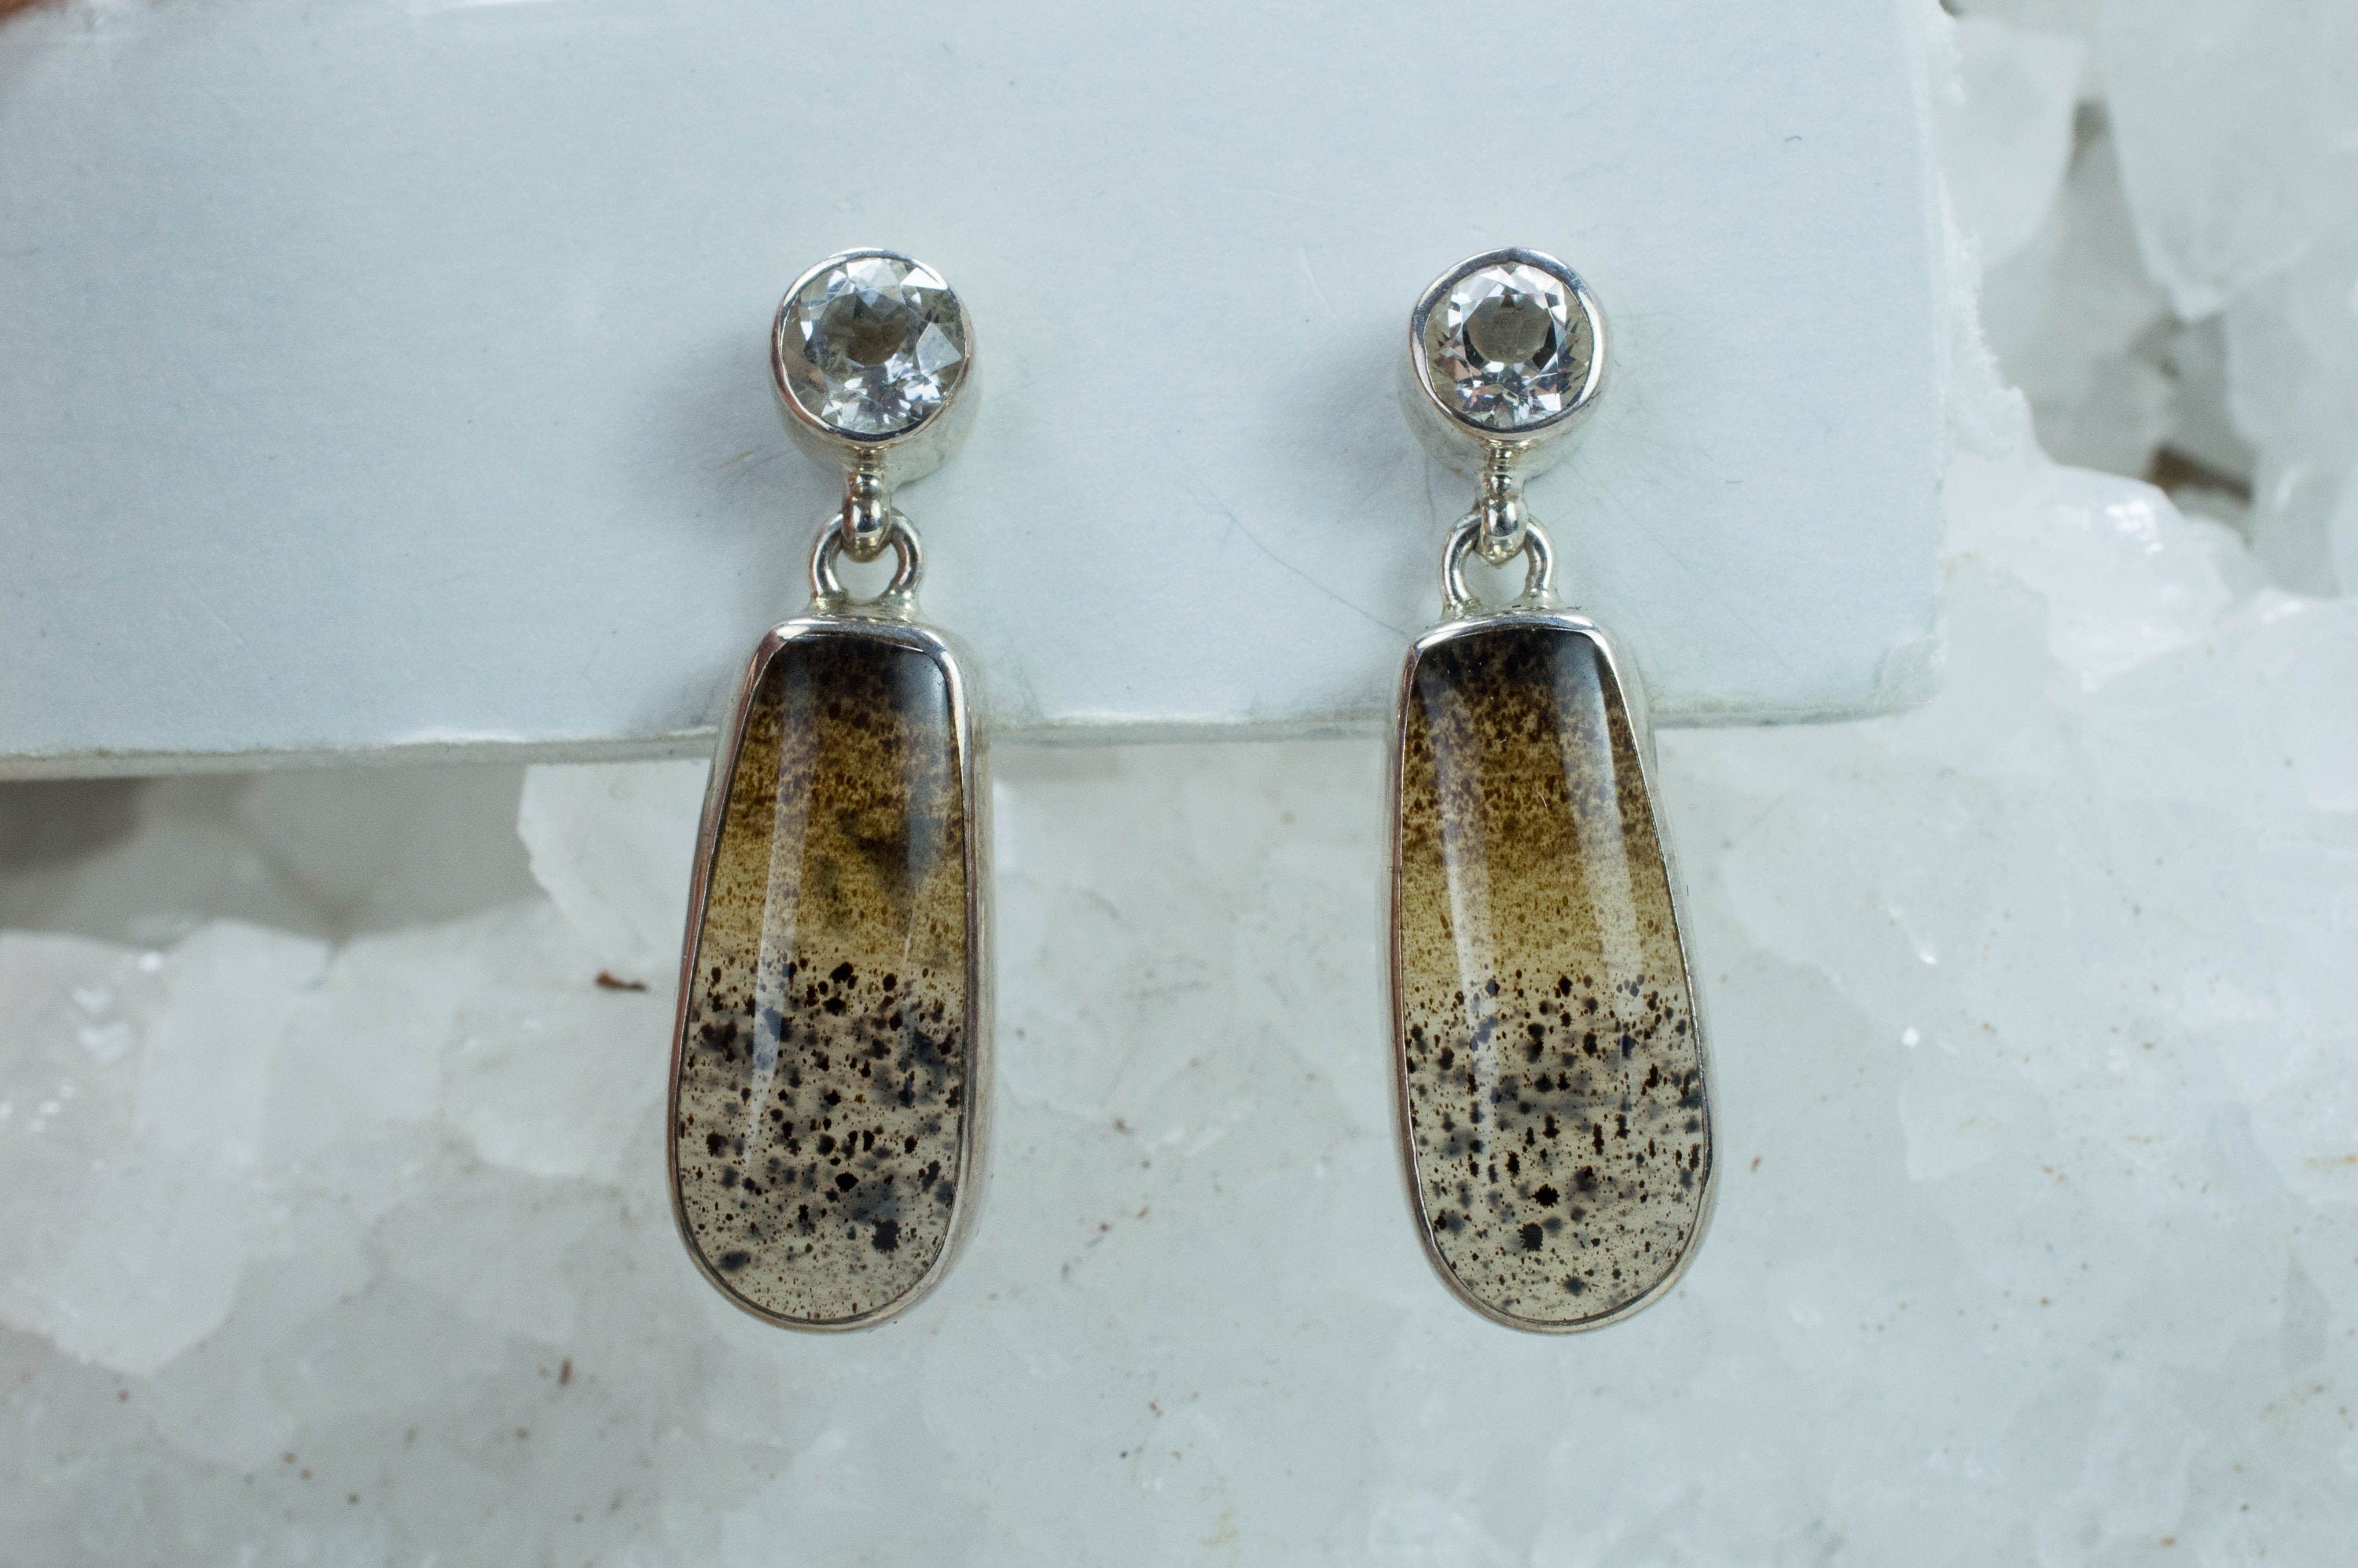 Montana Moss Agate and Quartz Sterling Silver Earrings, Genuine Untreated Agate; Agate Earrings - Mark Oliver Gems